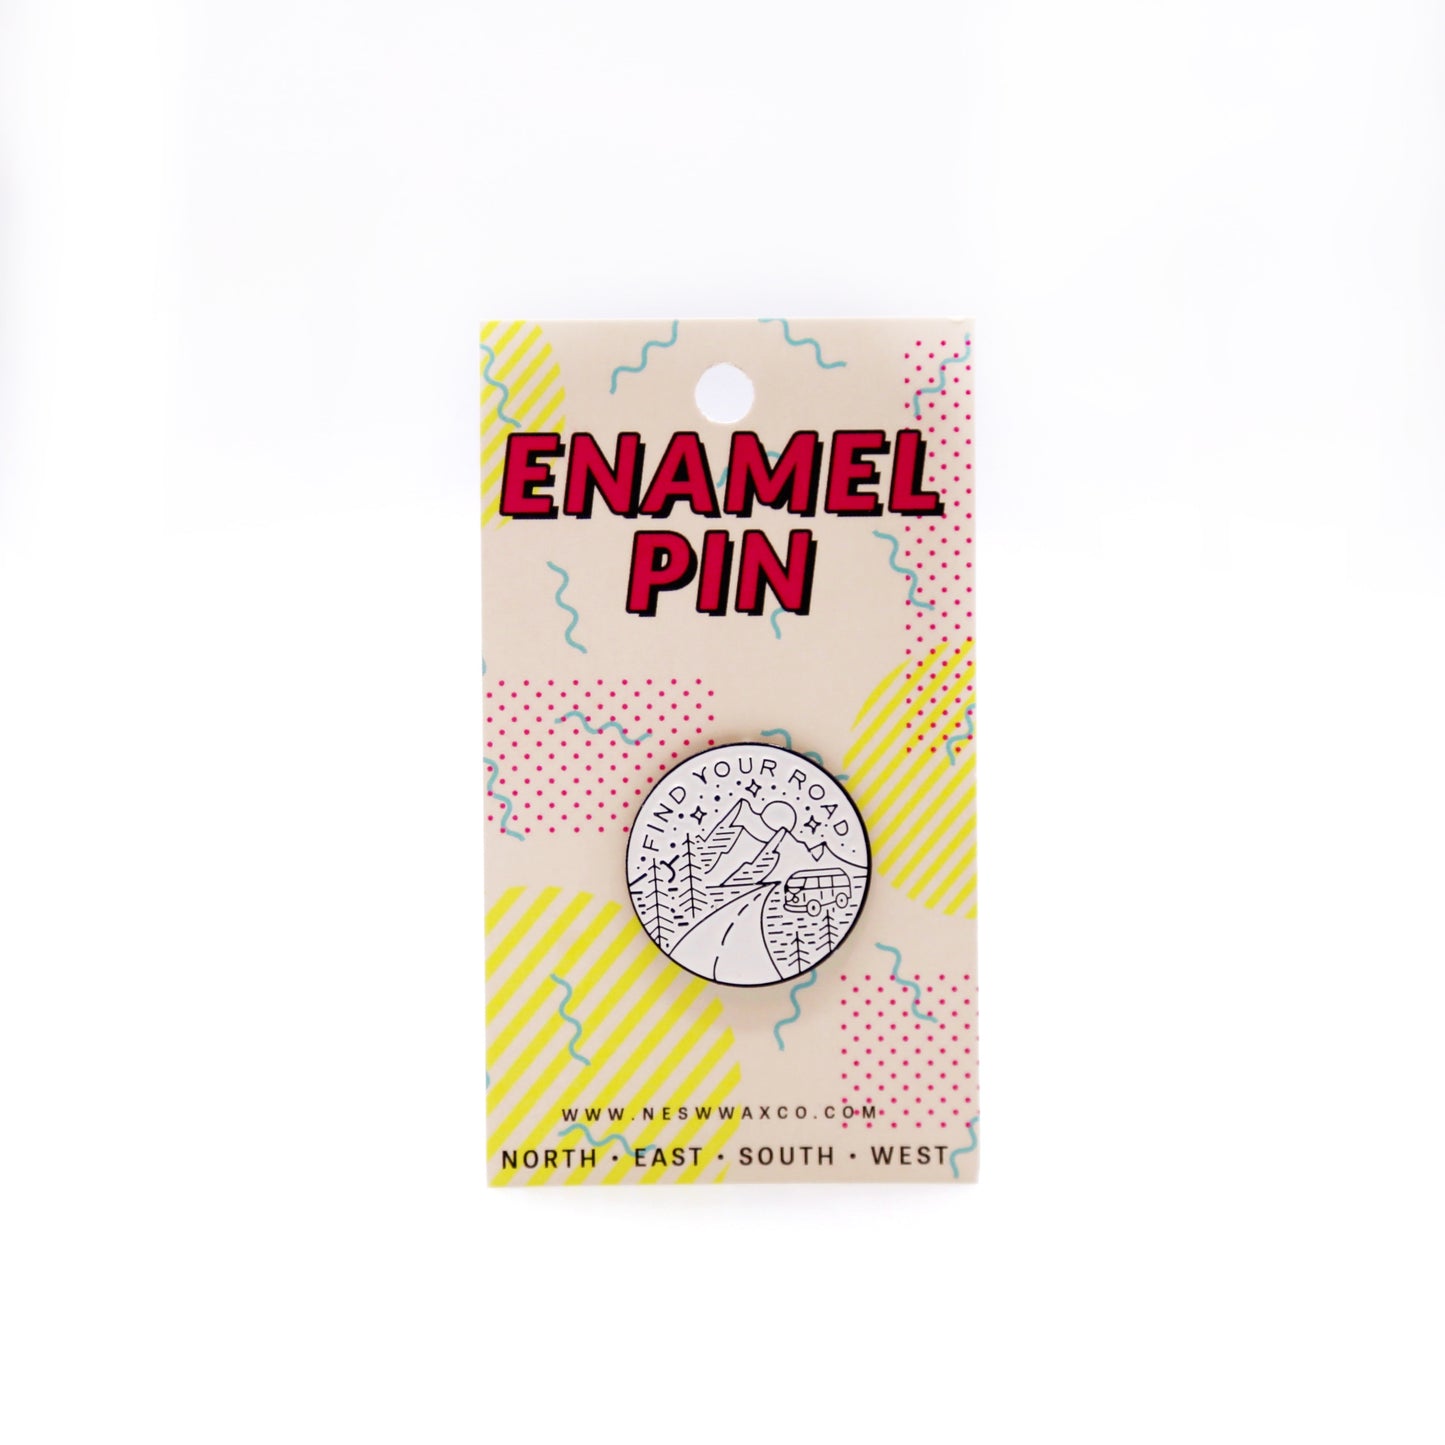 Find Your Road Enamel Pin